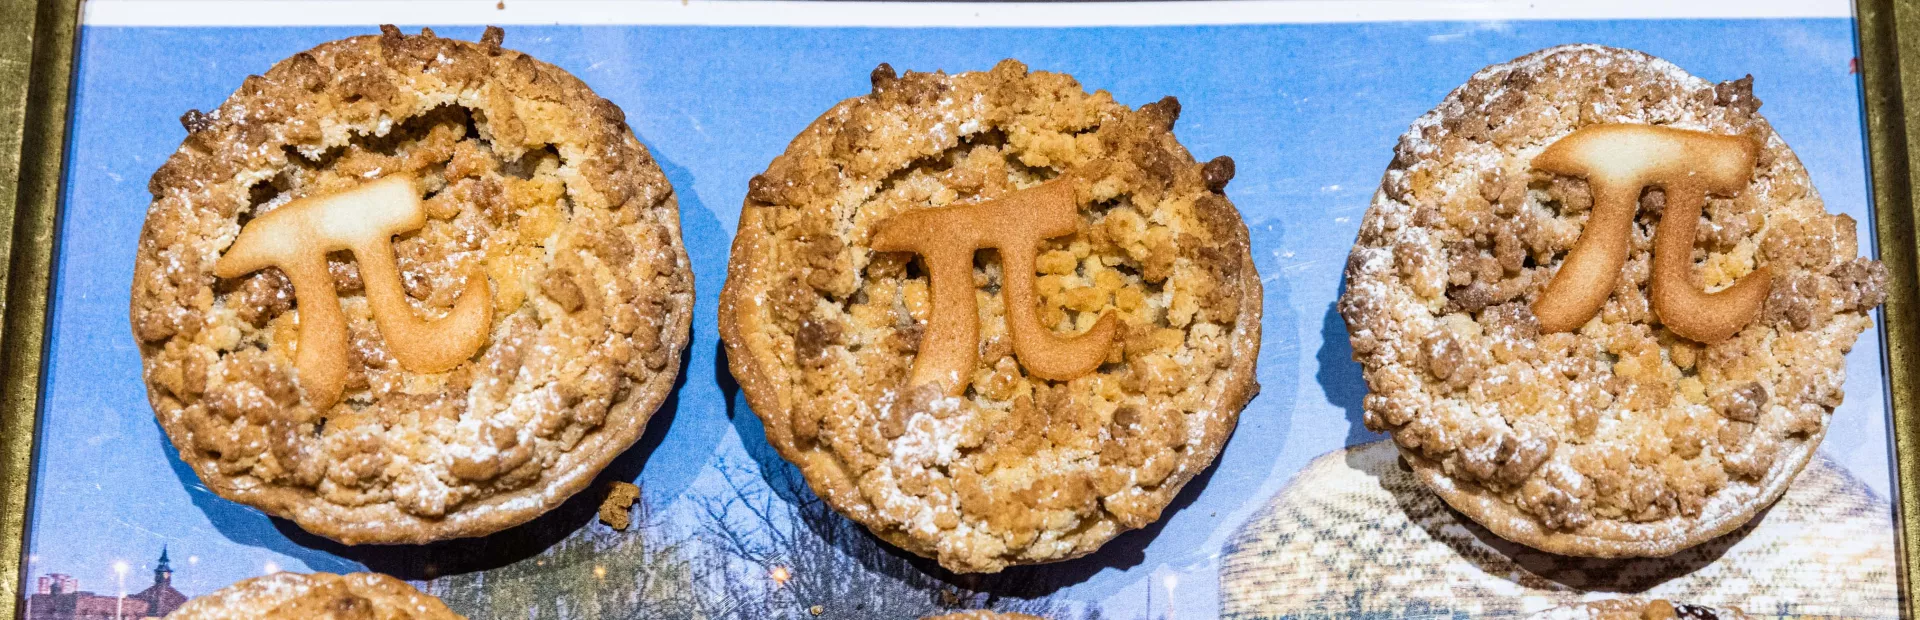 Behind the science: Pi(e)-Day